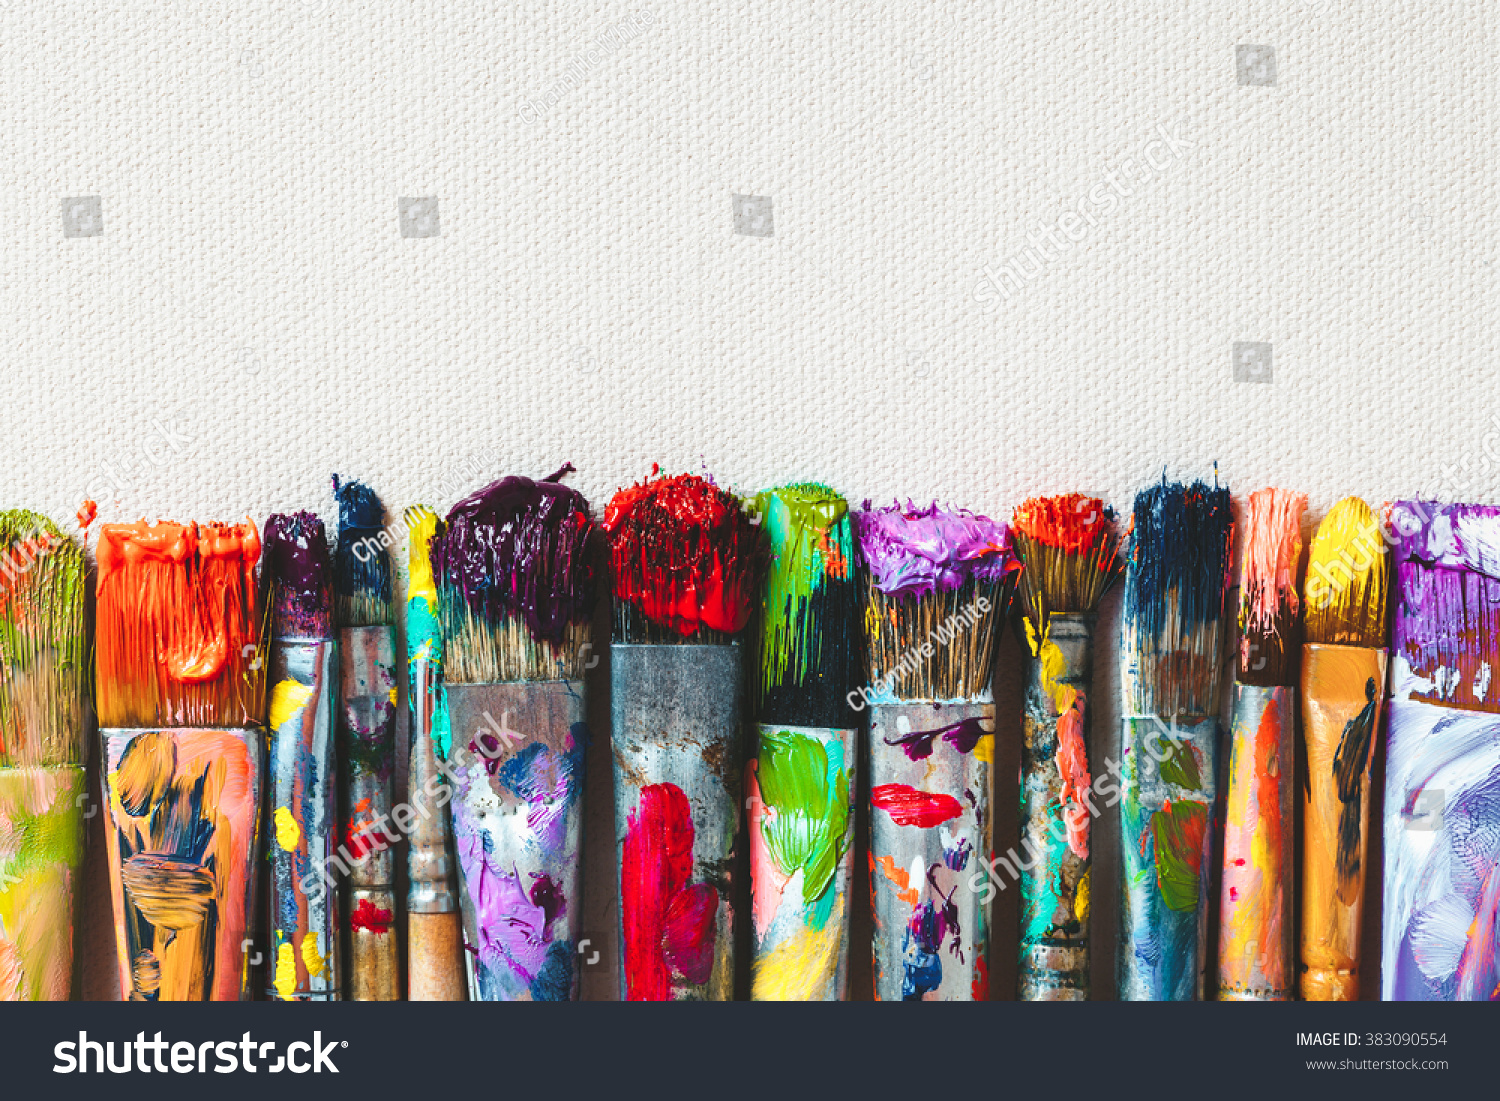 Row of artist paintbrushes closeup on artistic canvas. #383090554